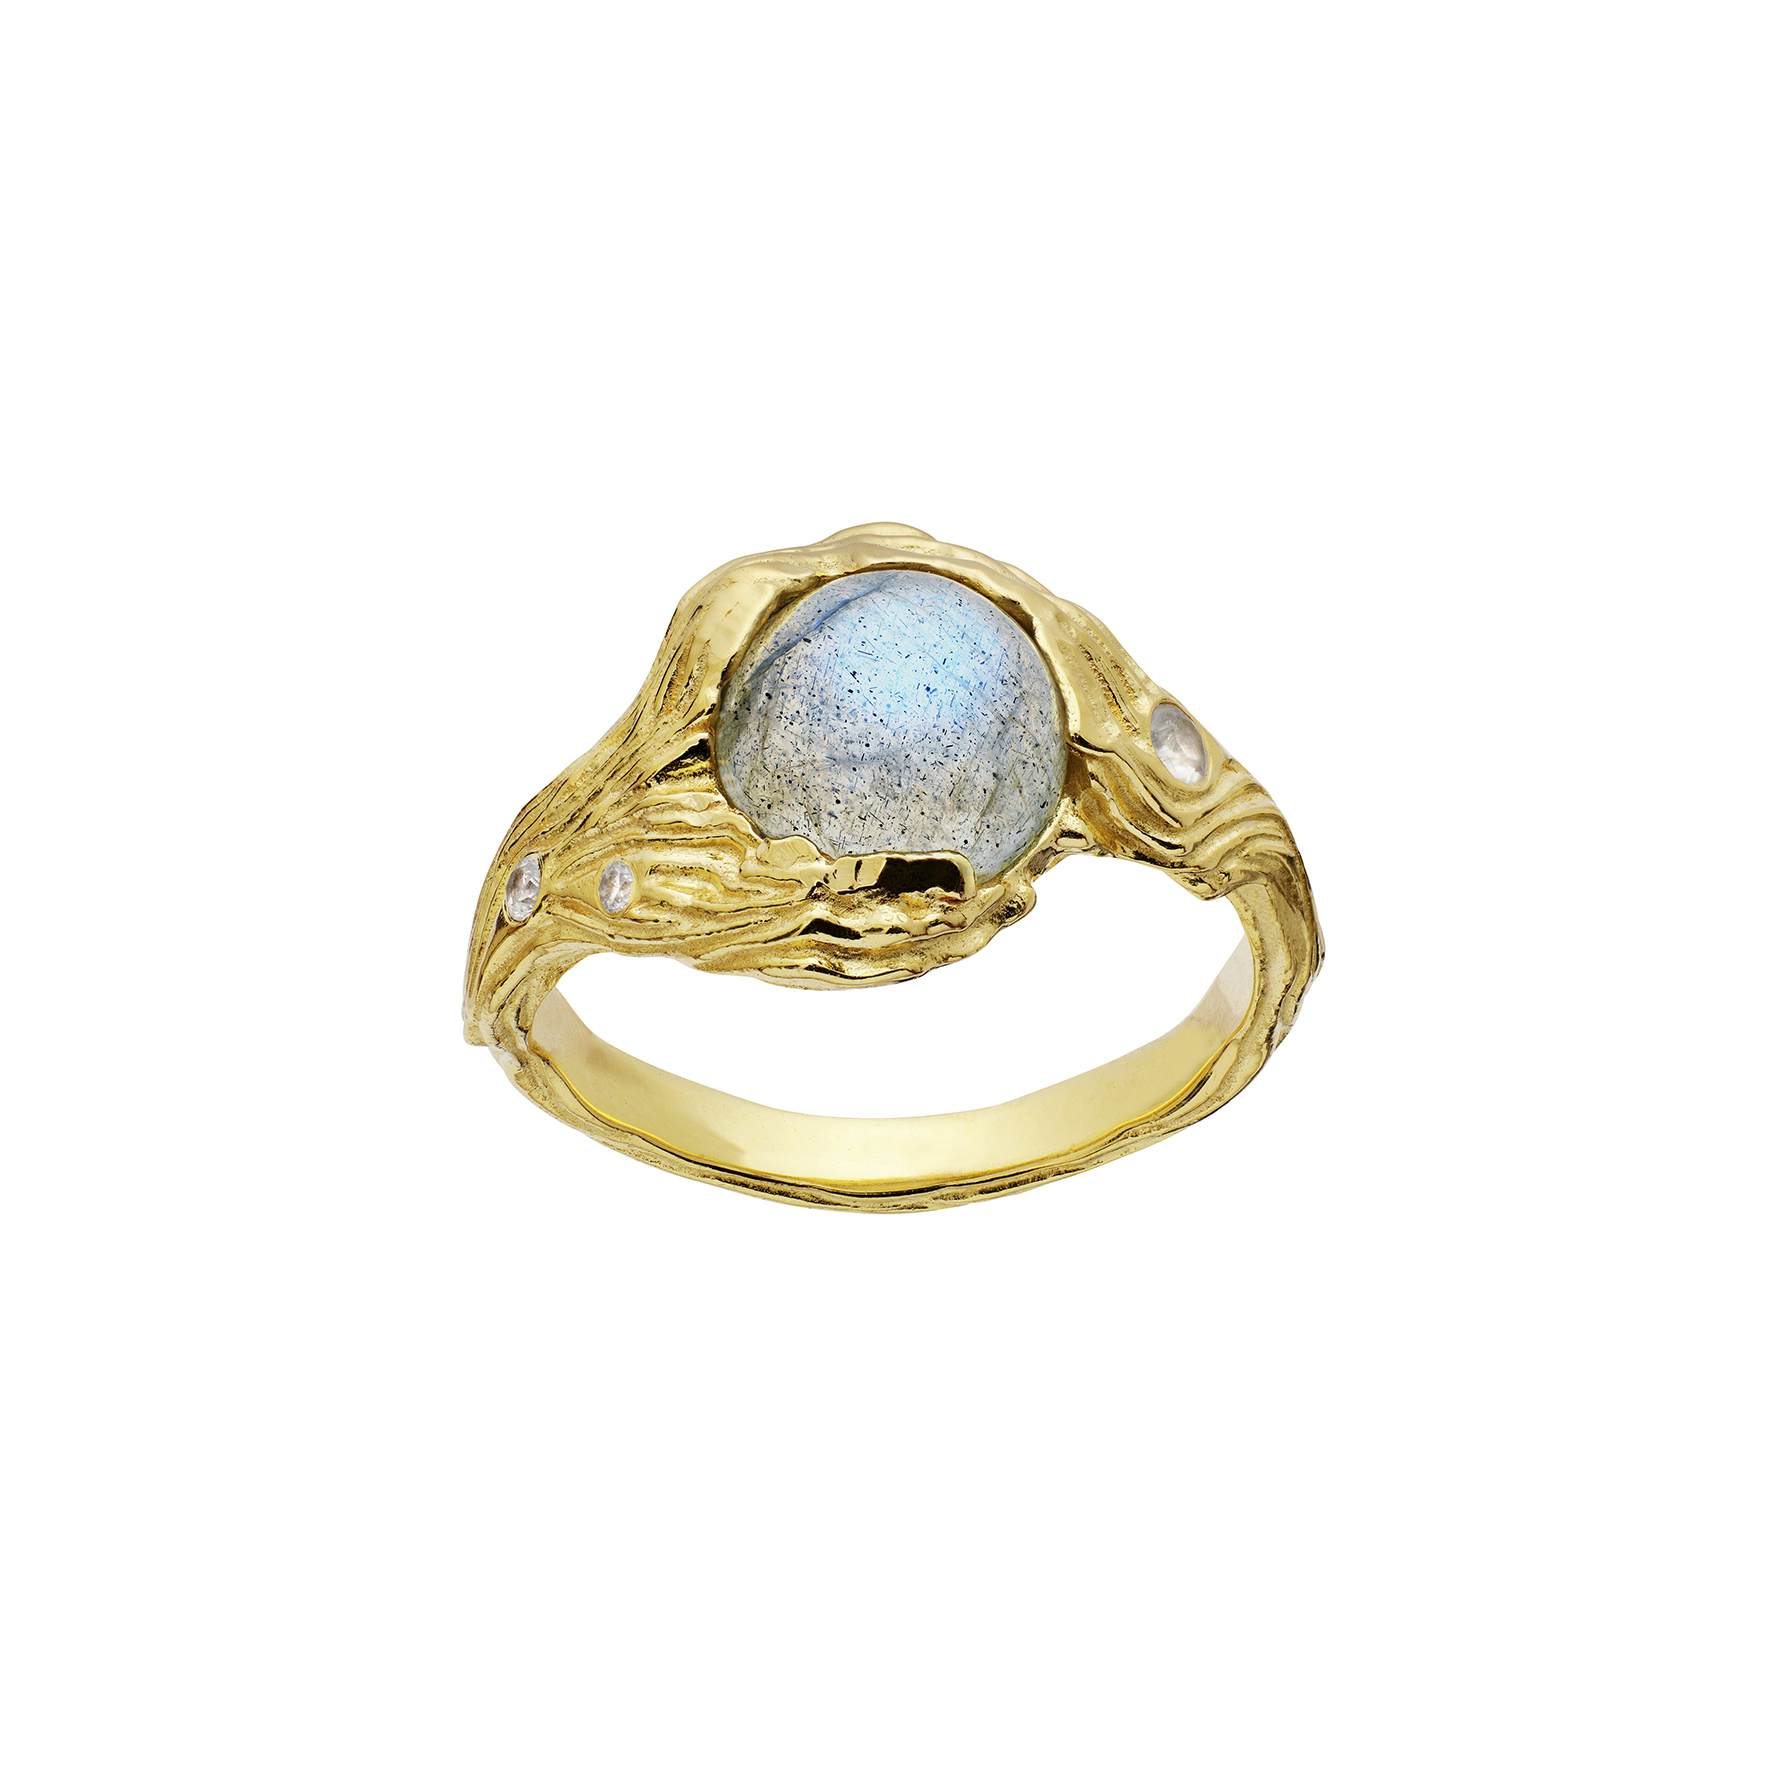 Calypso Water Ring from Maanesten in Goldplated-Silver Sterling 925